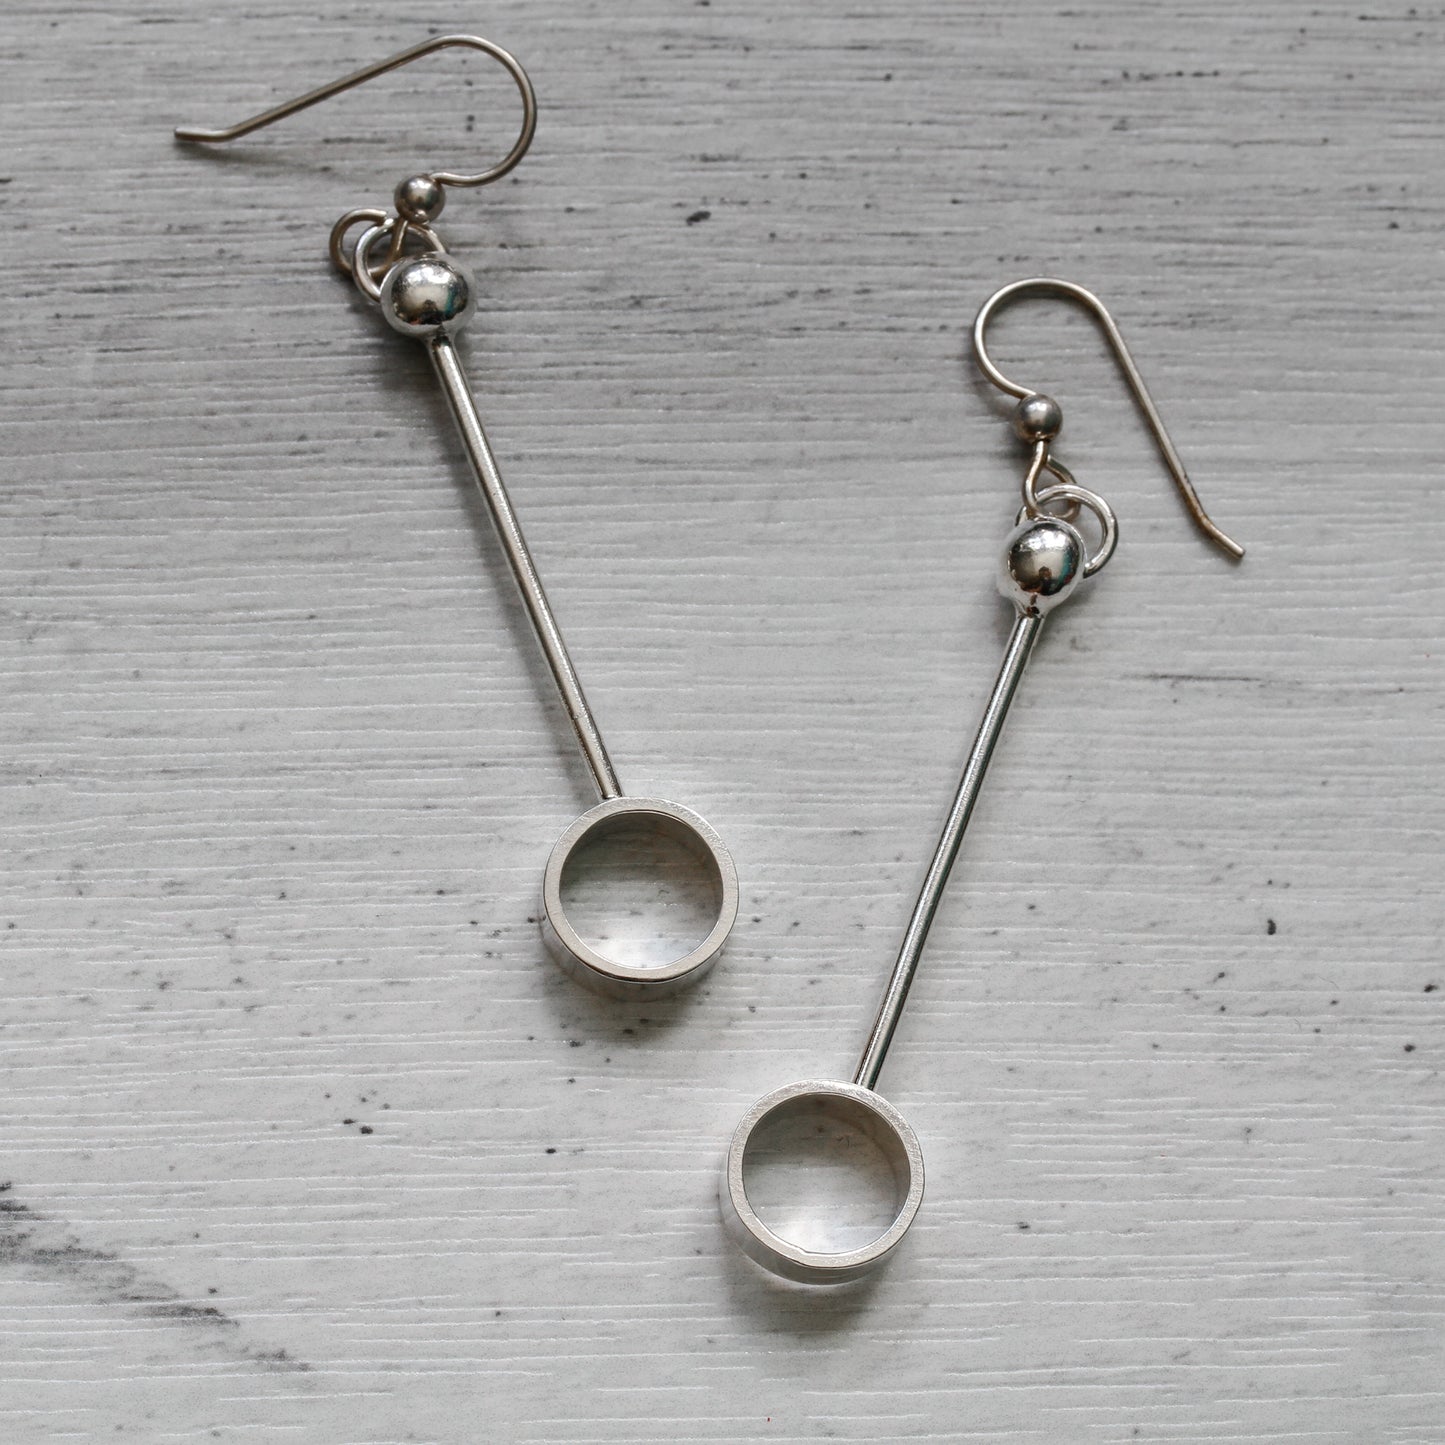 Minimalist and geometric circles sterling silver earrings.